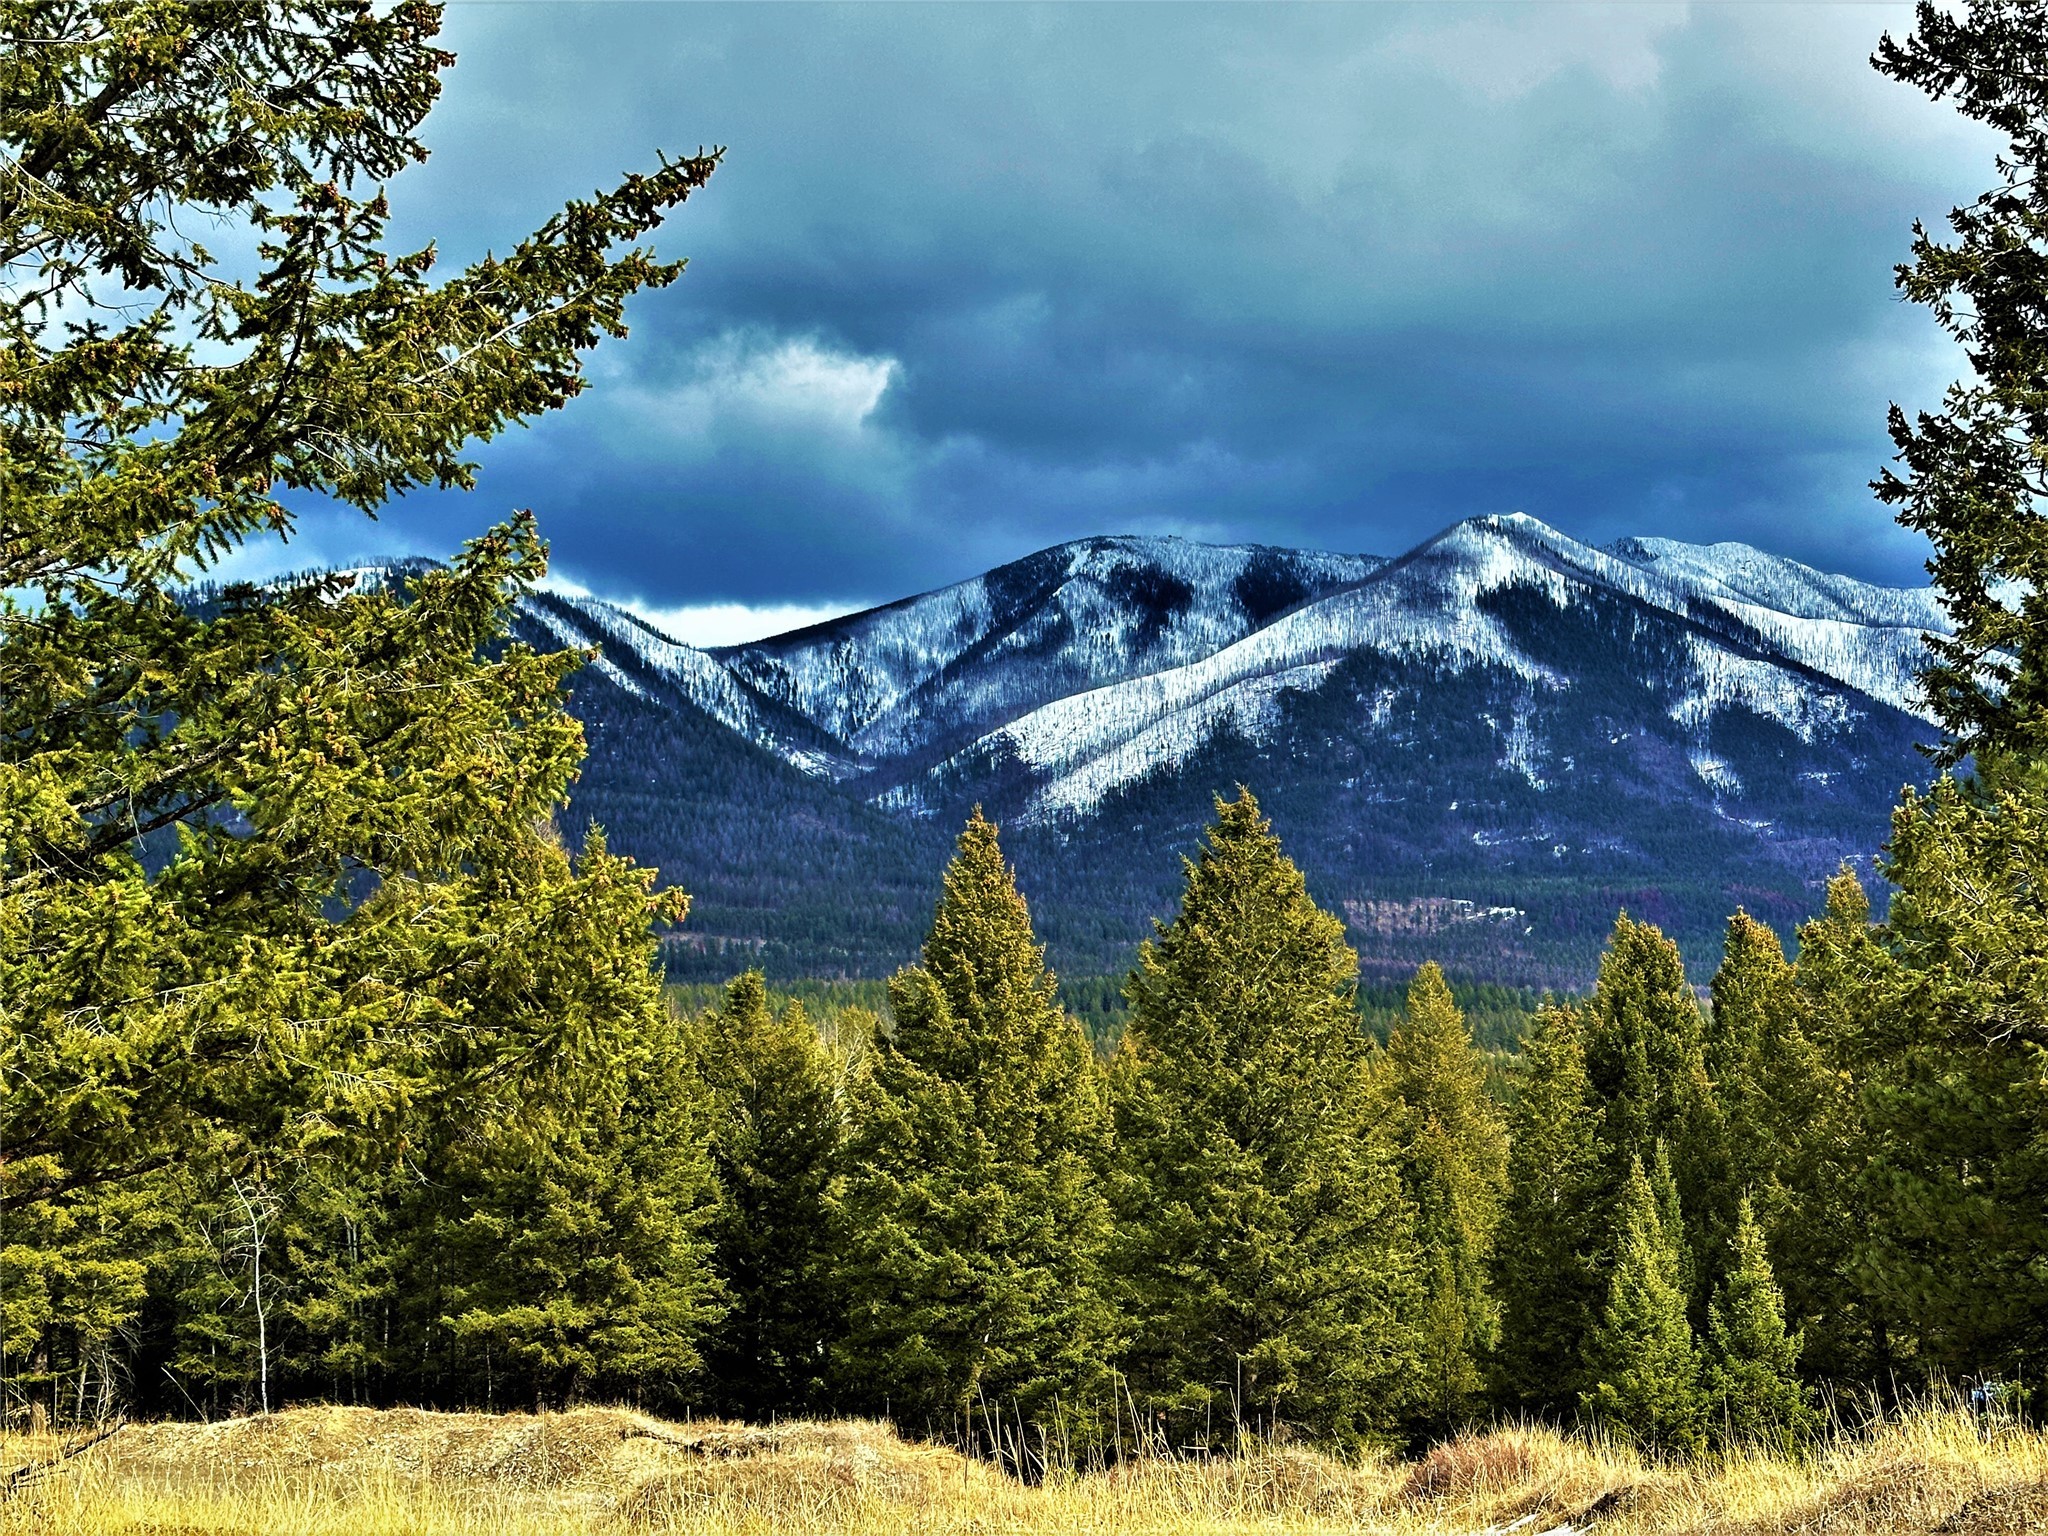 Uncover 86.05 acres of pristine land in Fortine, MT, boasting awe-inspiring mountain views. Just a 35-minute drive from Whitefish and a quick 12-minute trip from Eureka, this expansive property offers both tranquility and stunning natural vistas.Call Rick @ 406-249-3109 or your real estate professional TODAY!!!